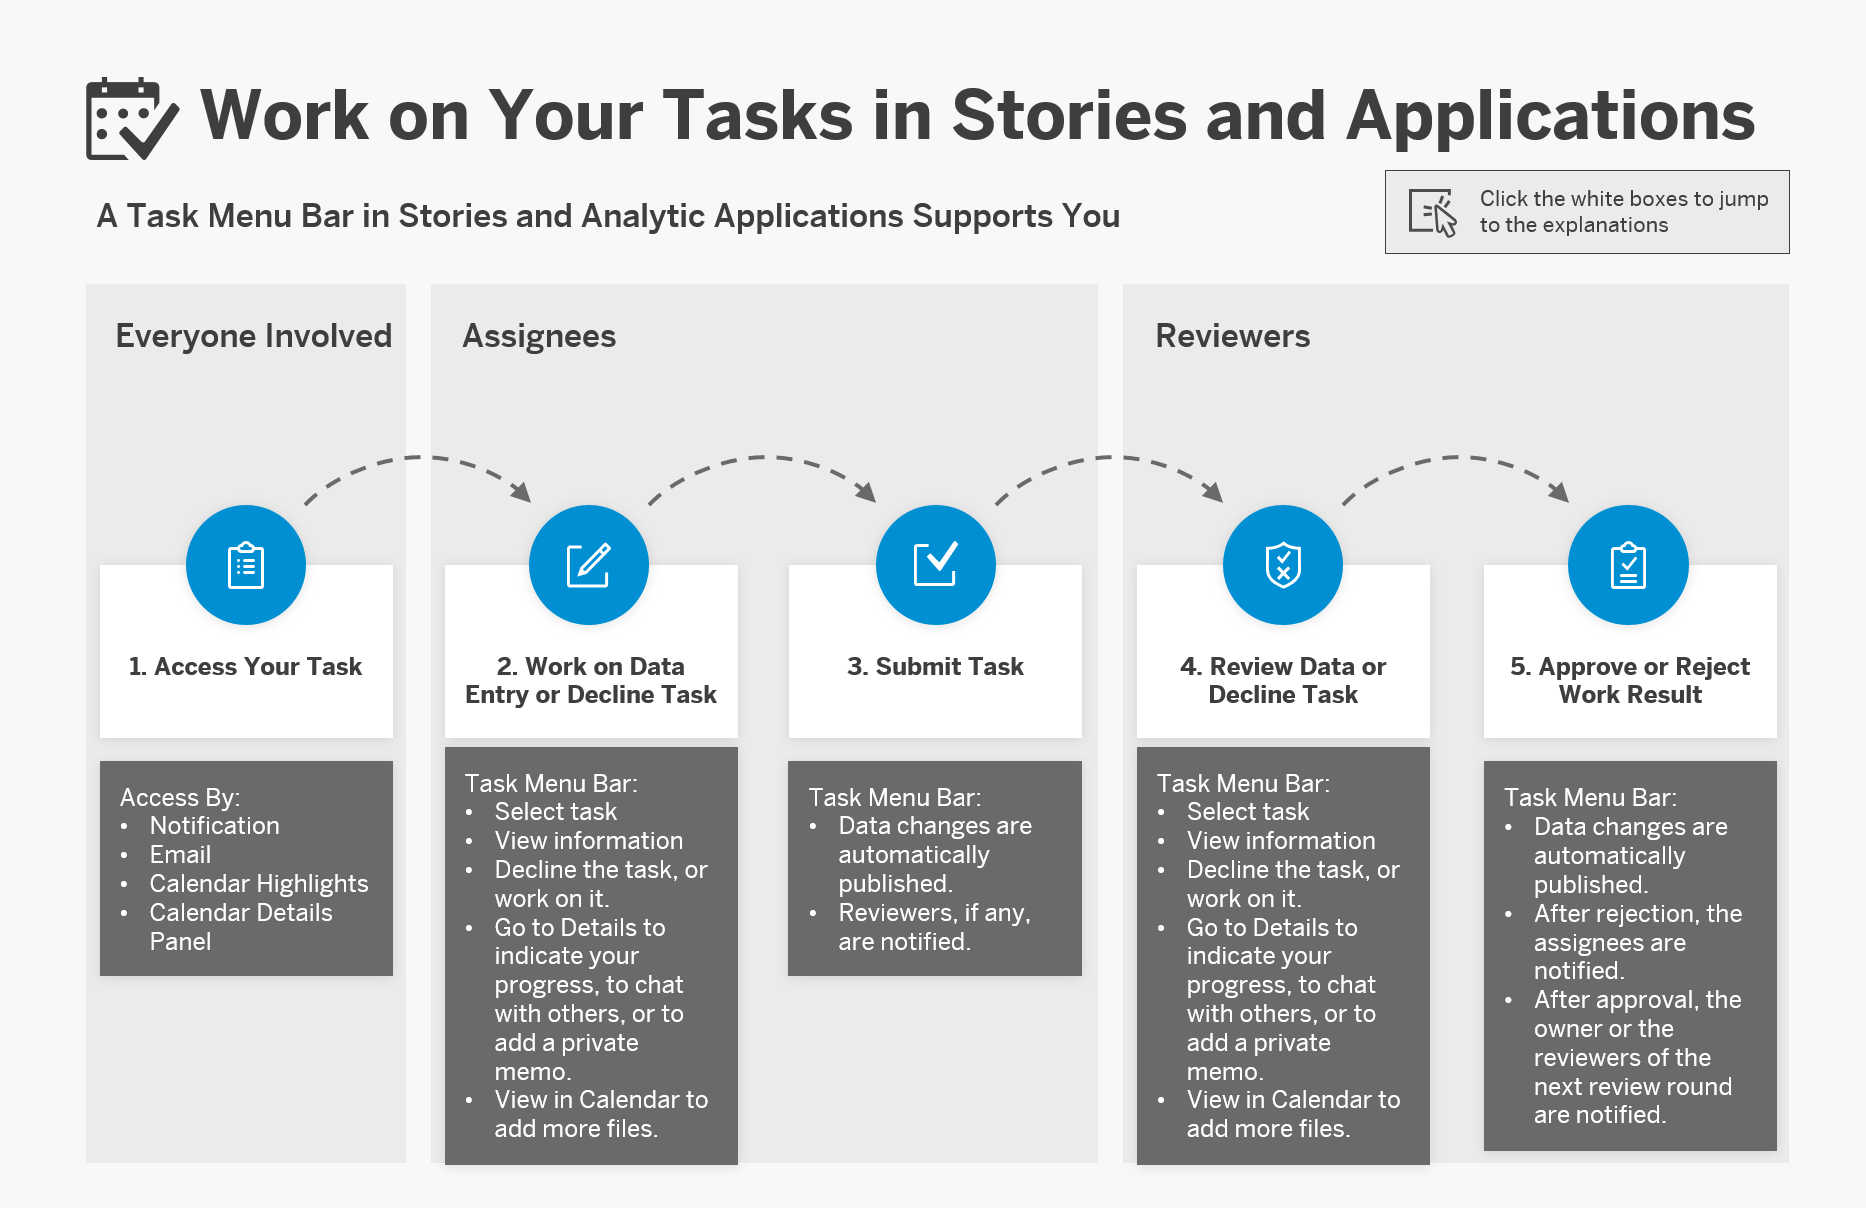 This graphic illustrates the workflow how people can access calendar
							events, and how assignees and reviewers can work directly in stories and
							analytic applications to enter and review data.